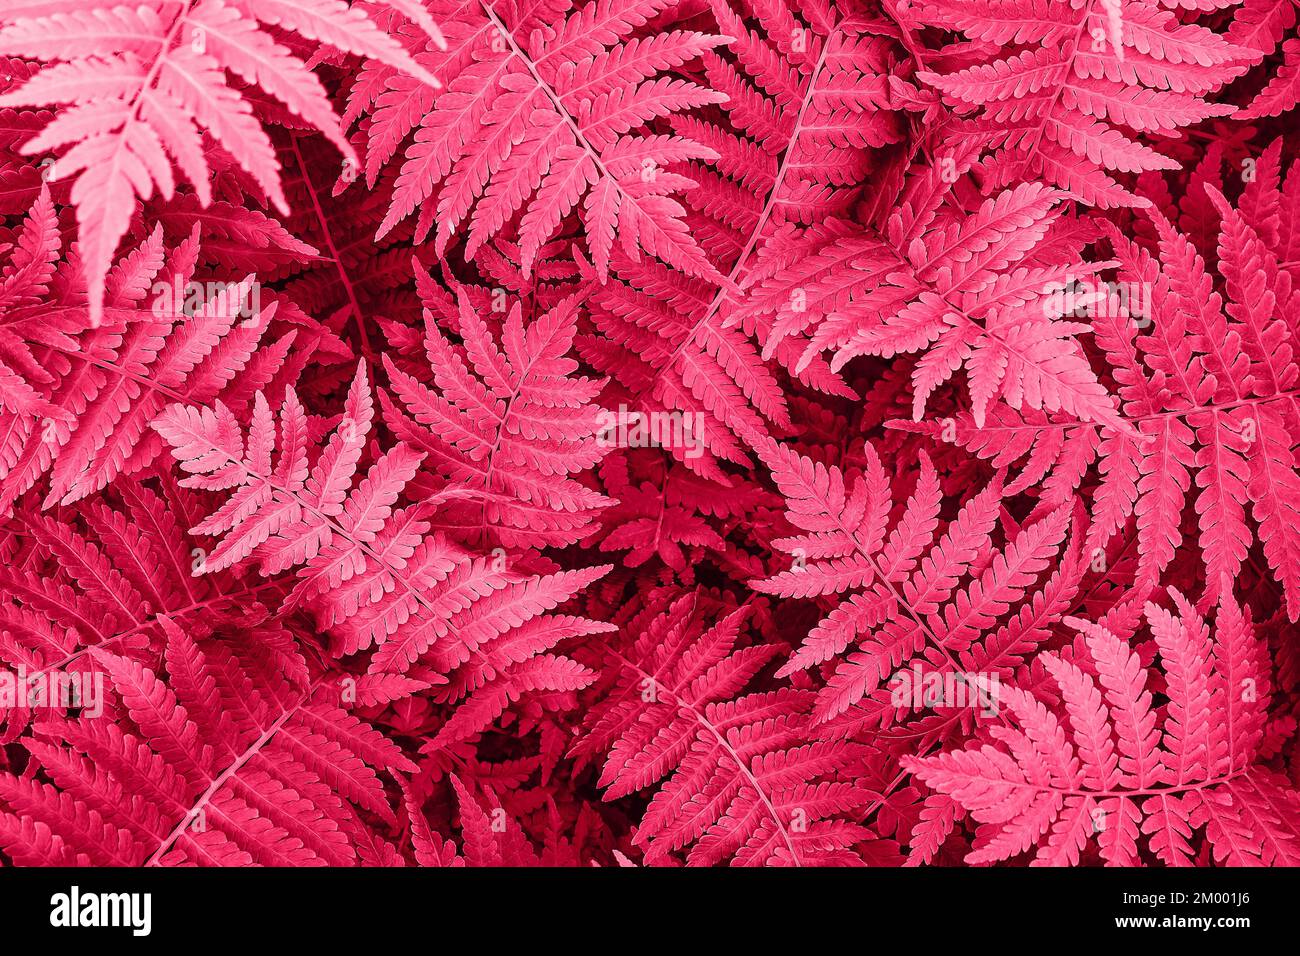 Fern leaves close-up as background. Viva magenta. Stock Photo